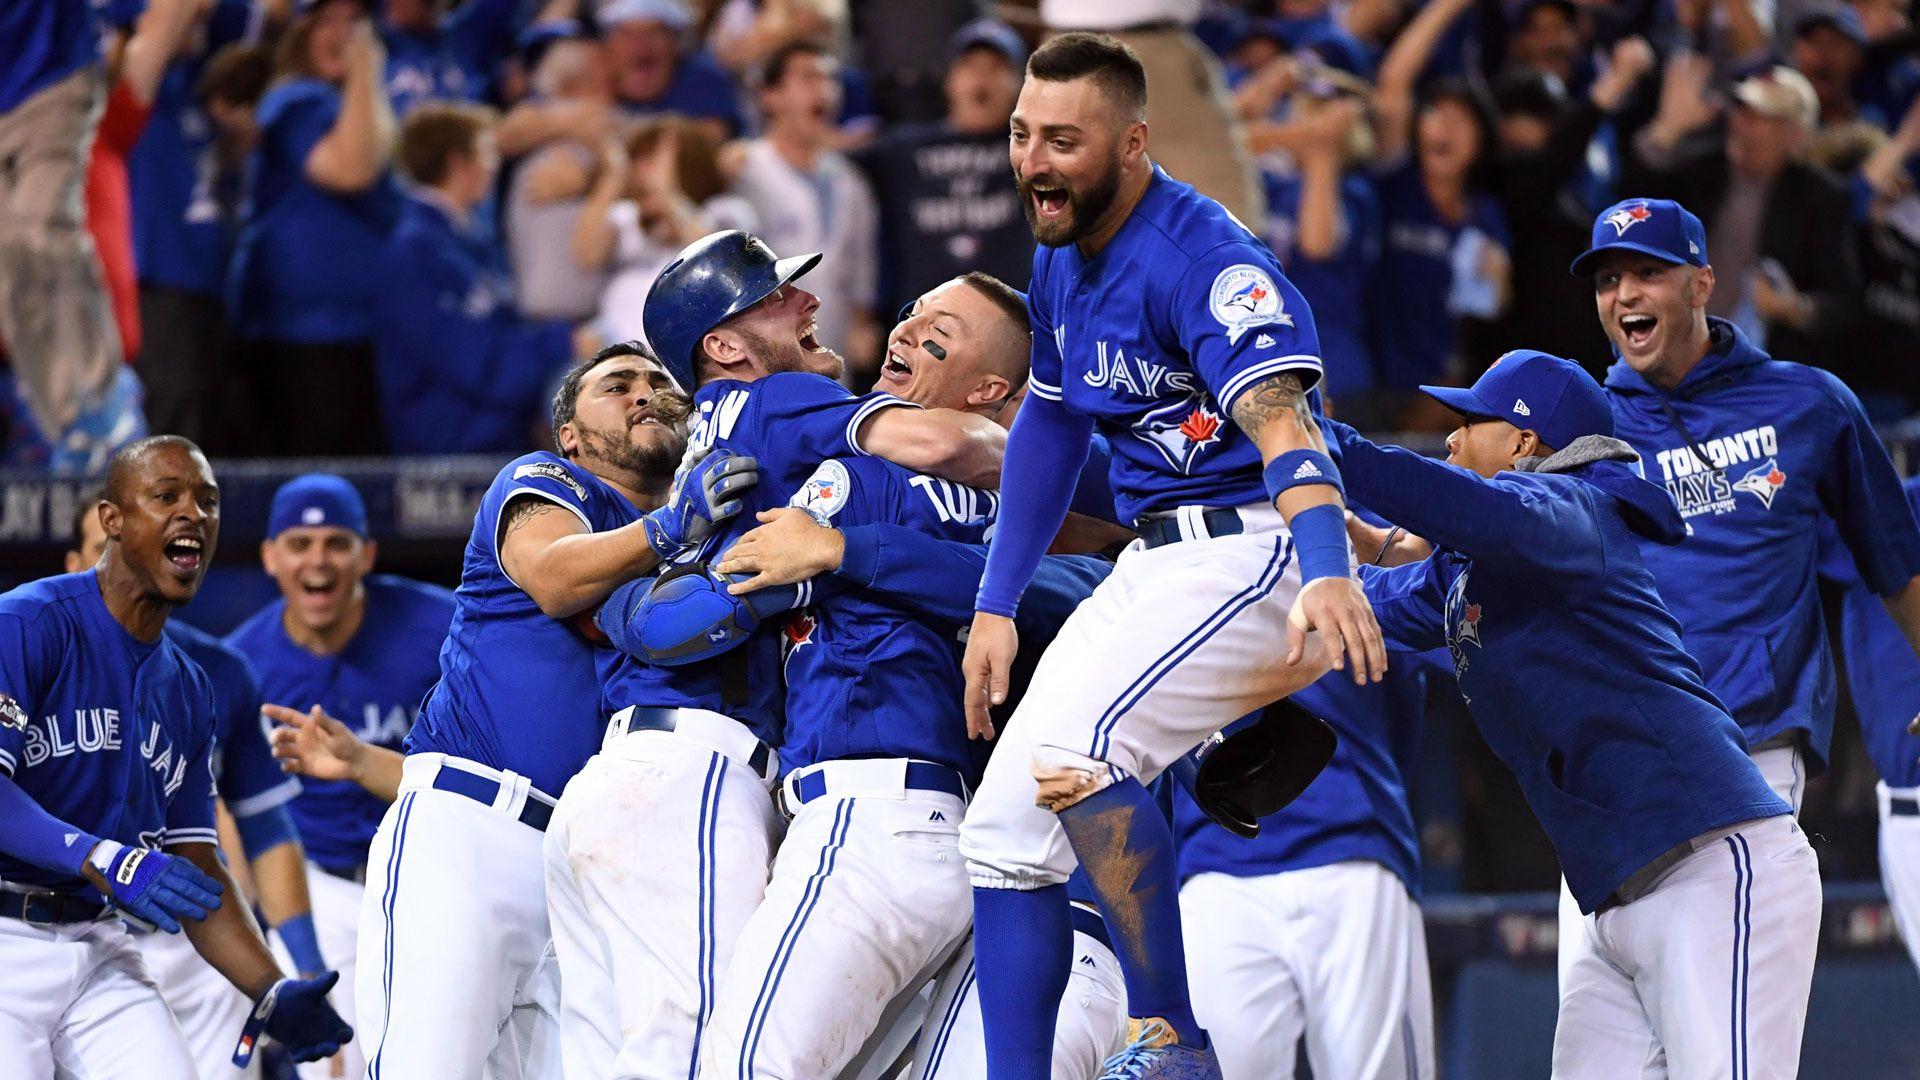 Blue Jays sweep Rangers, head to ALCS on Donaldson's dash home